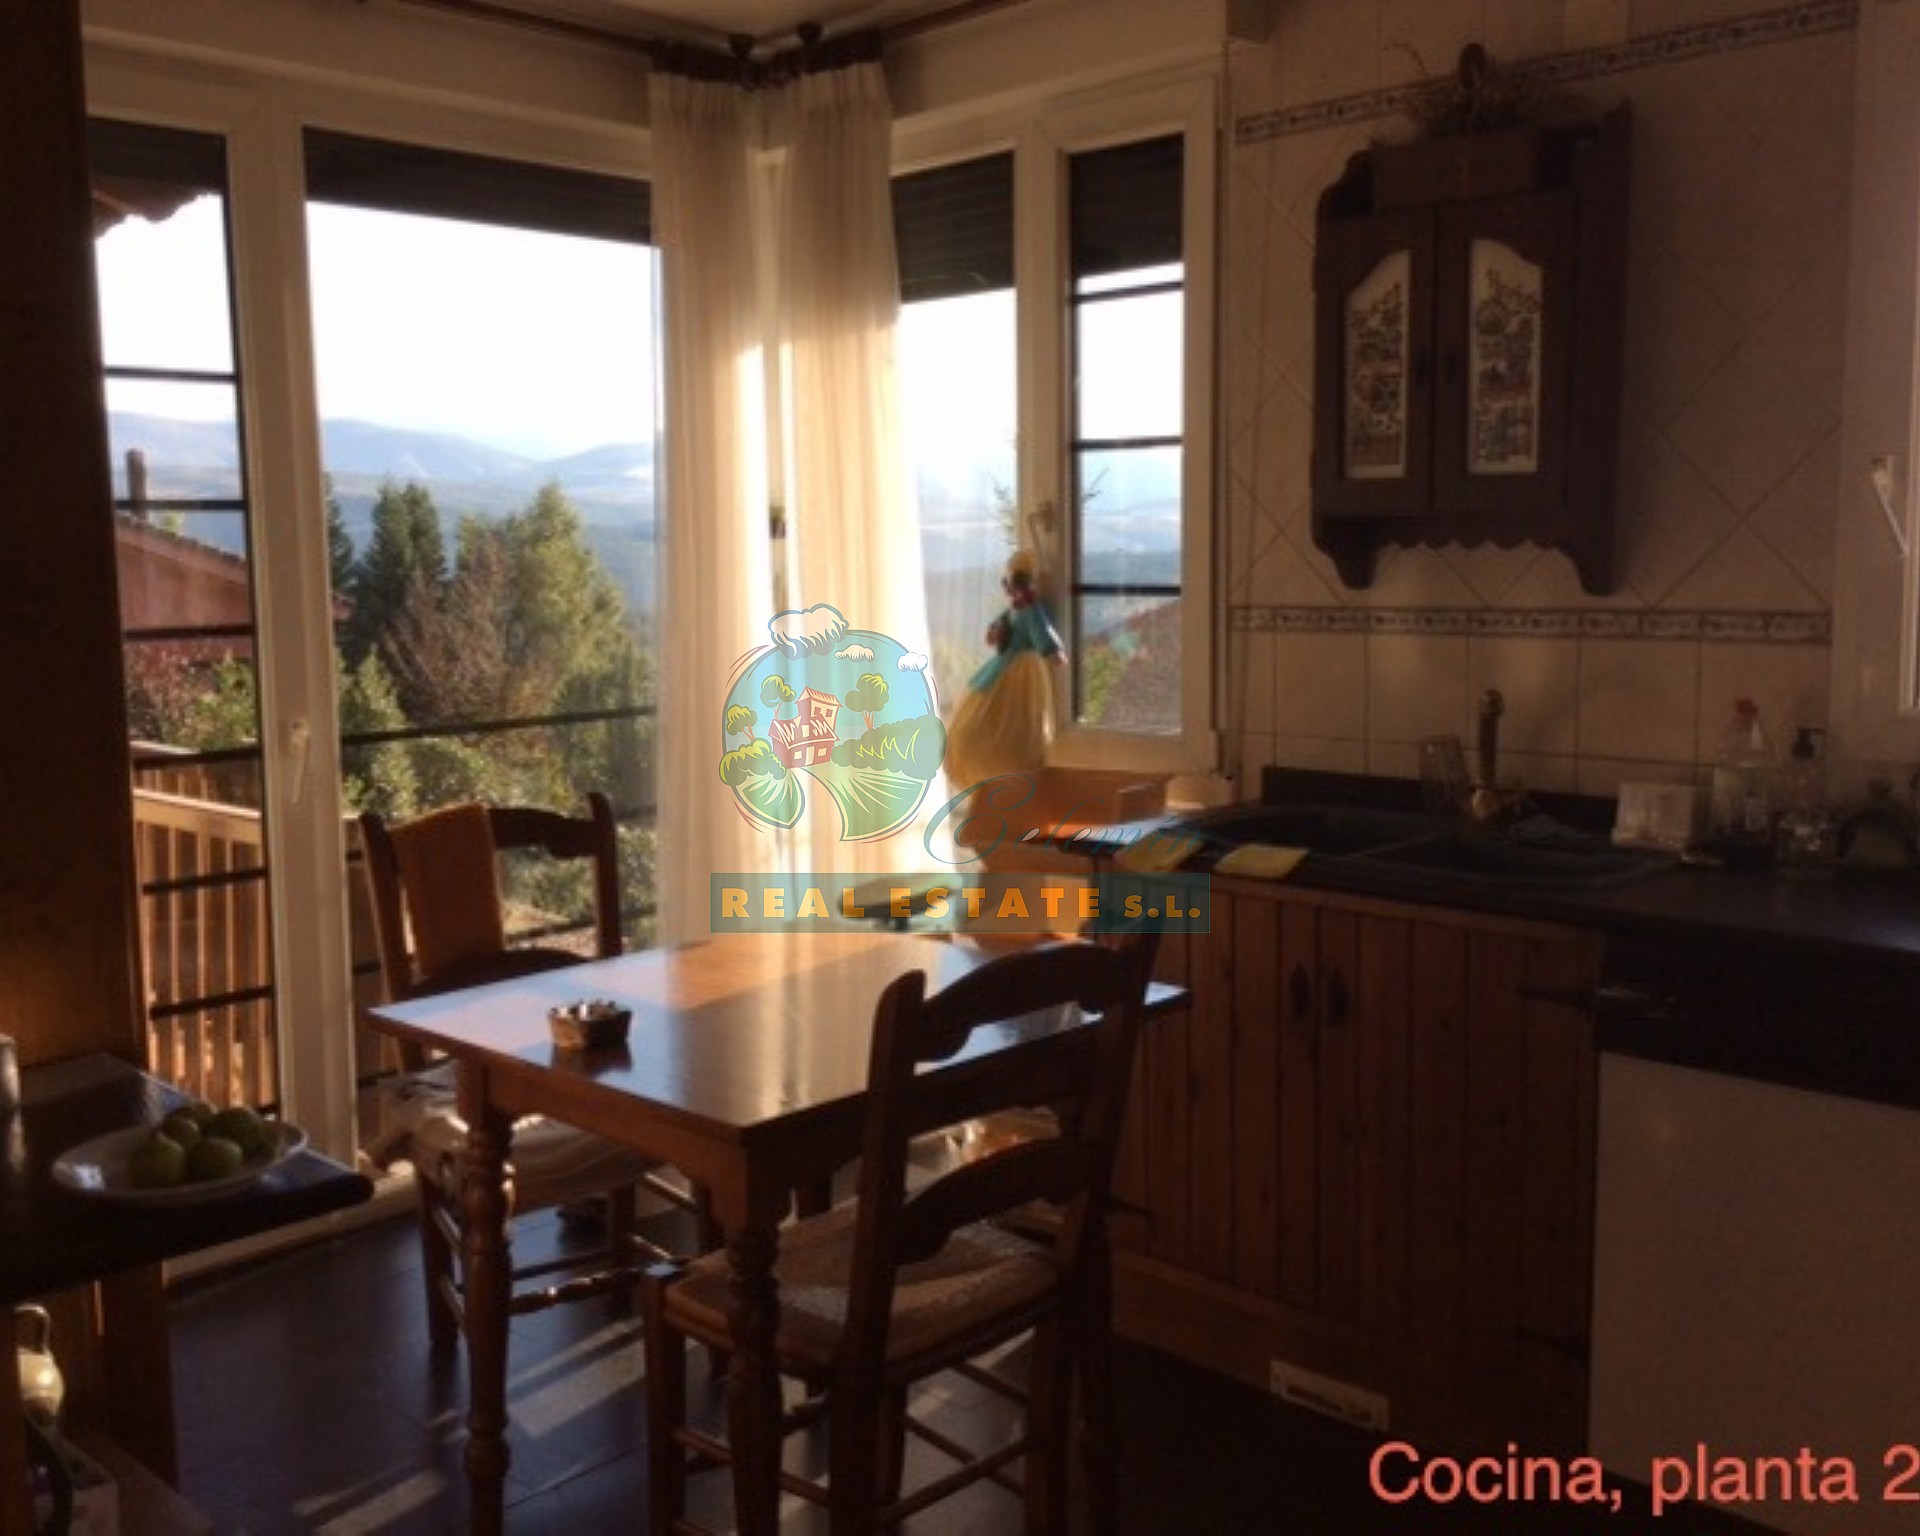 Furnished apartment in Sierra de Gredos. 